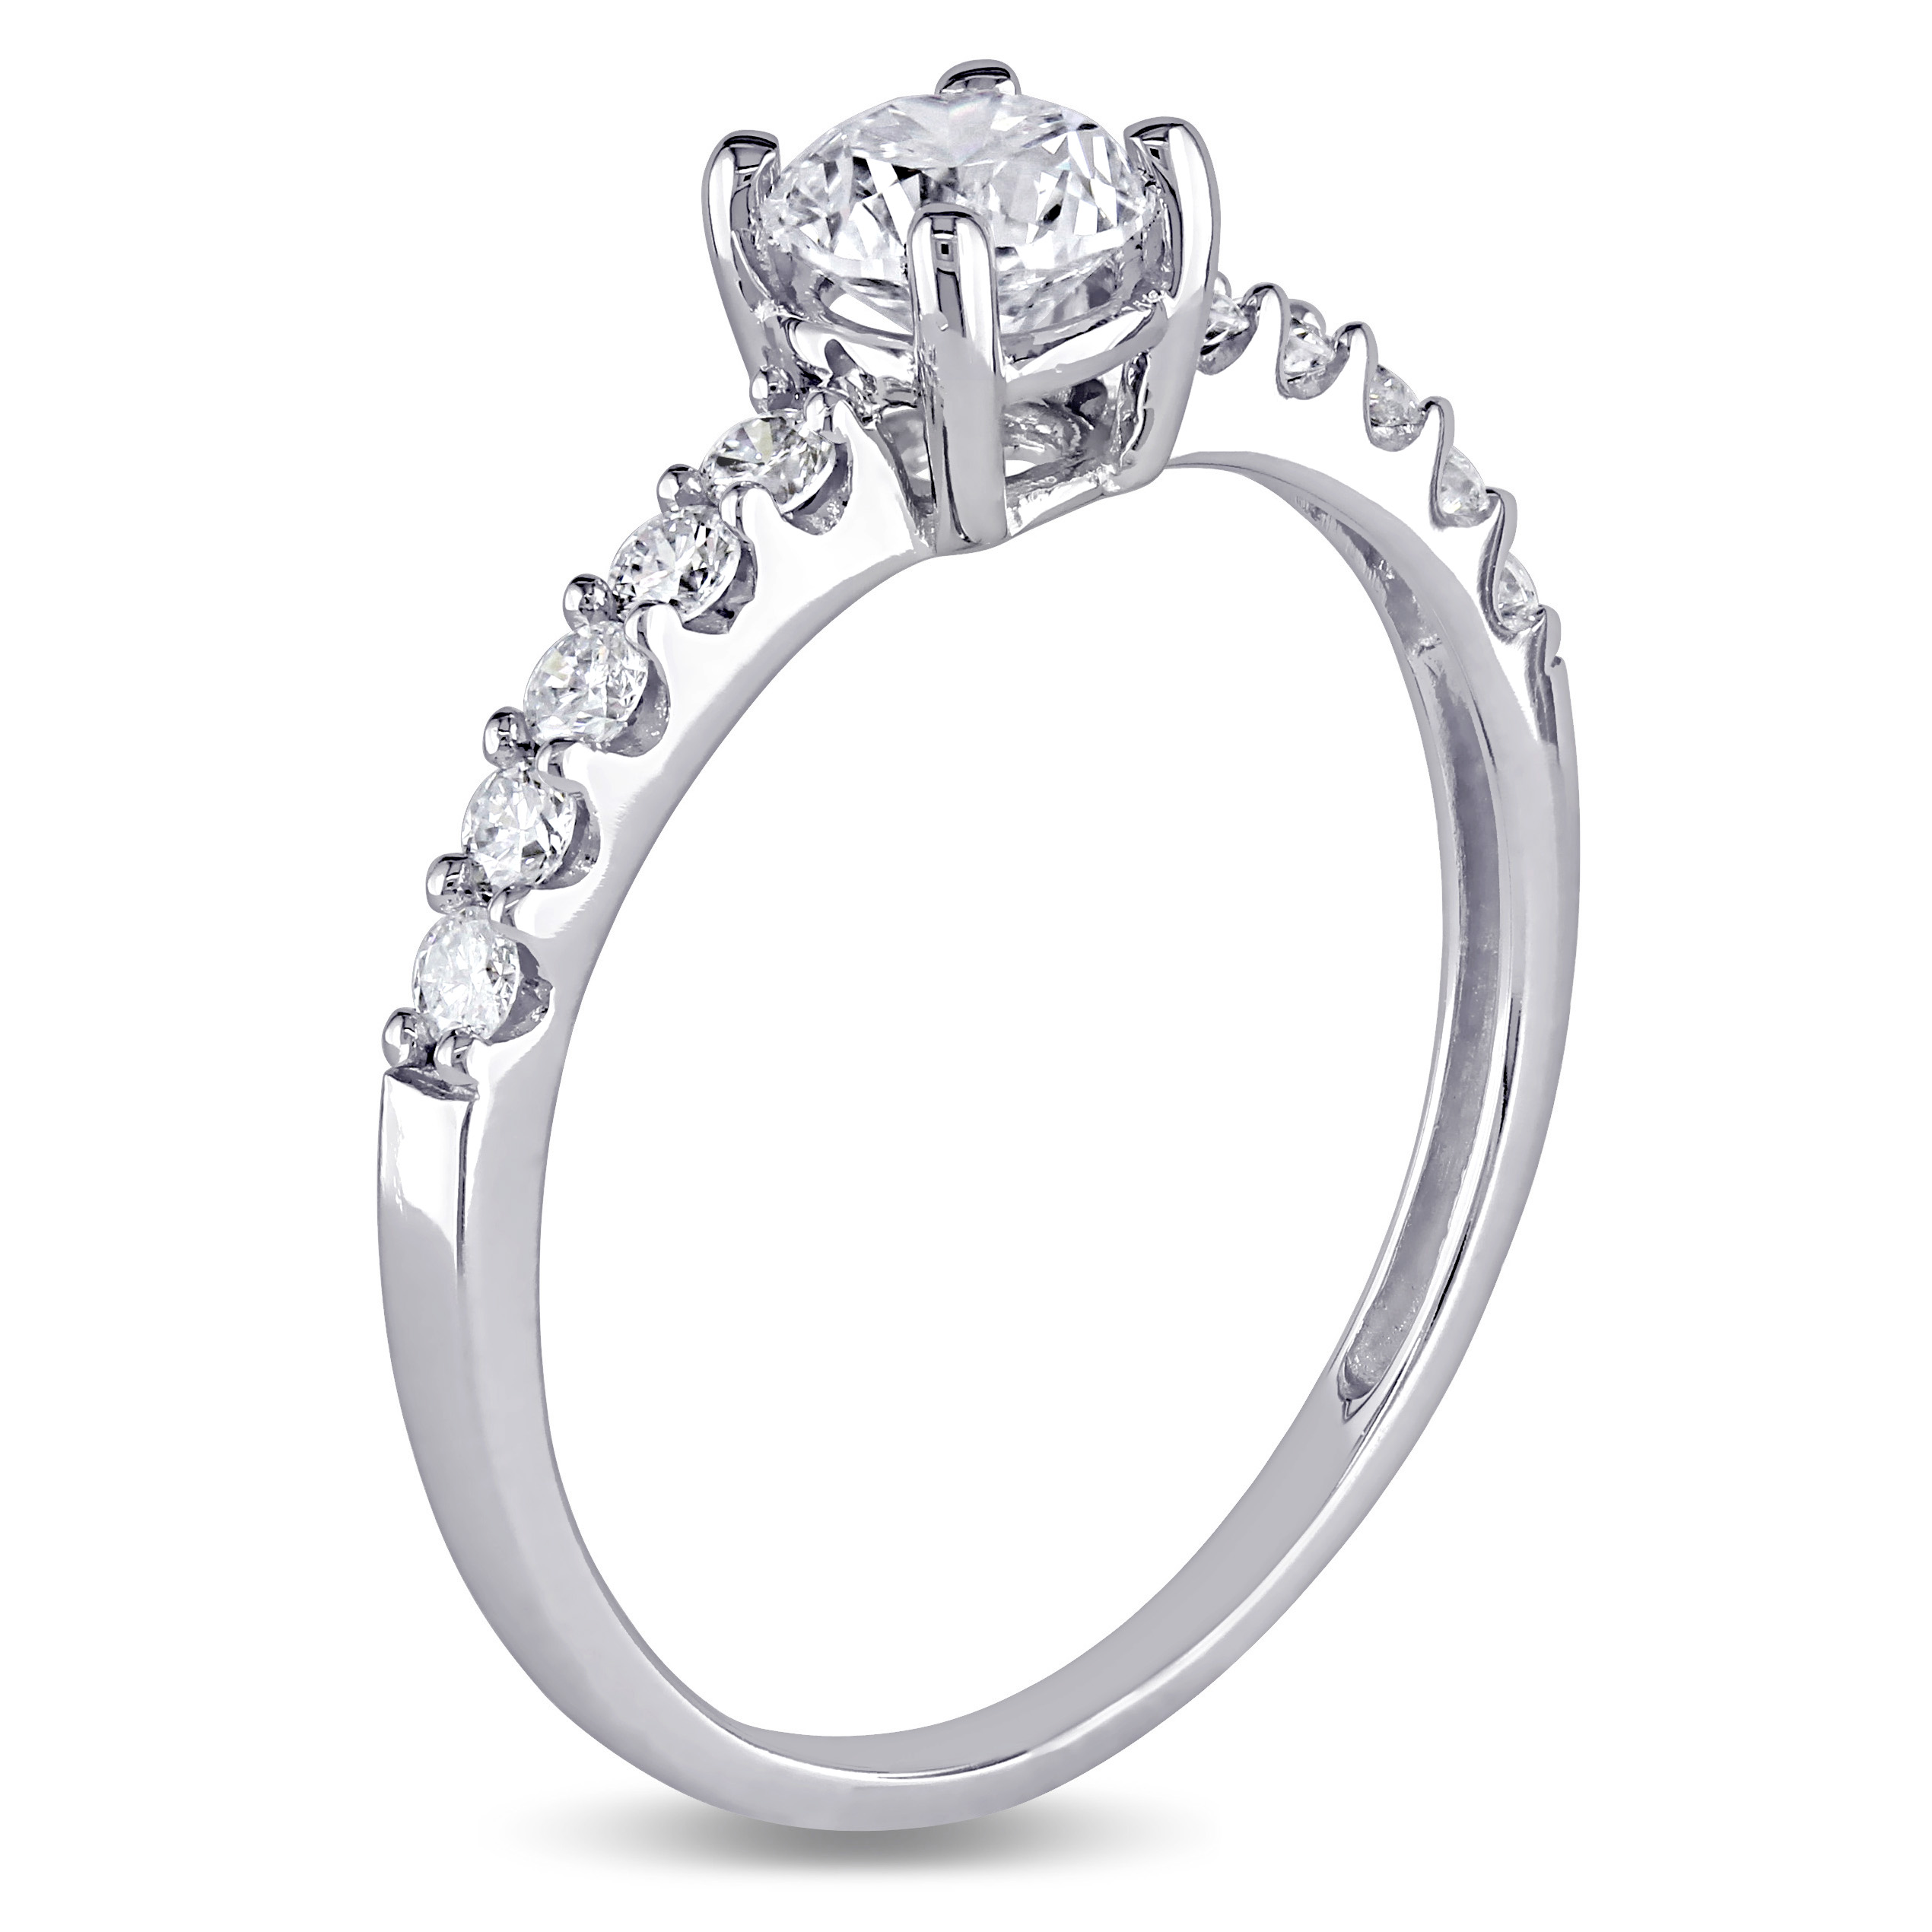 3/4 CT TW Diamond Engagement Ring in 14k White Gold